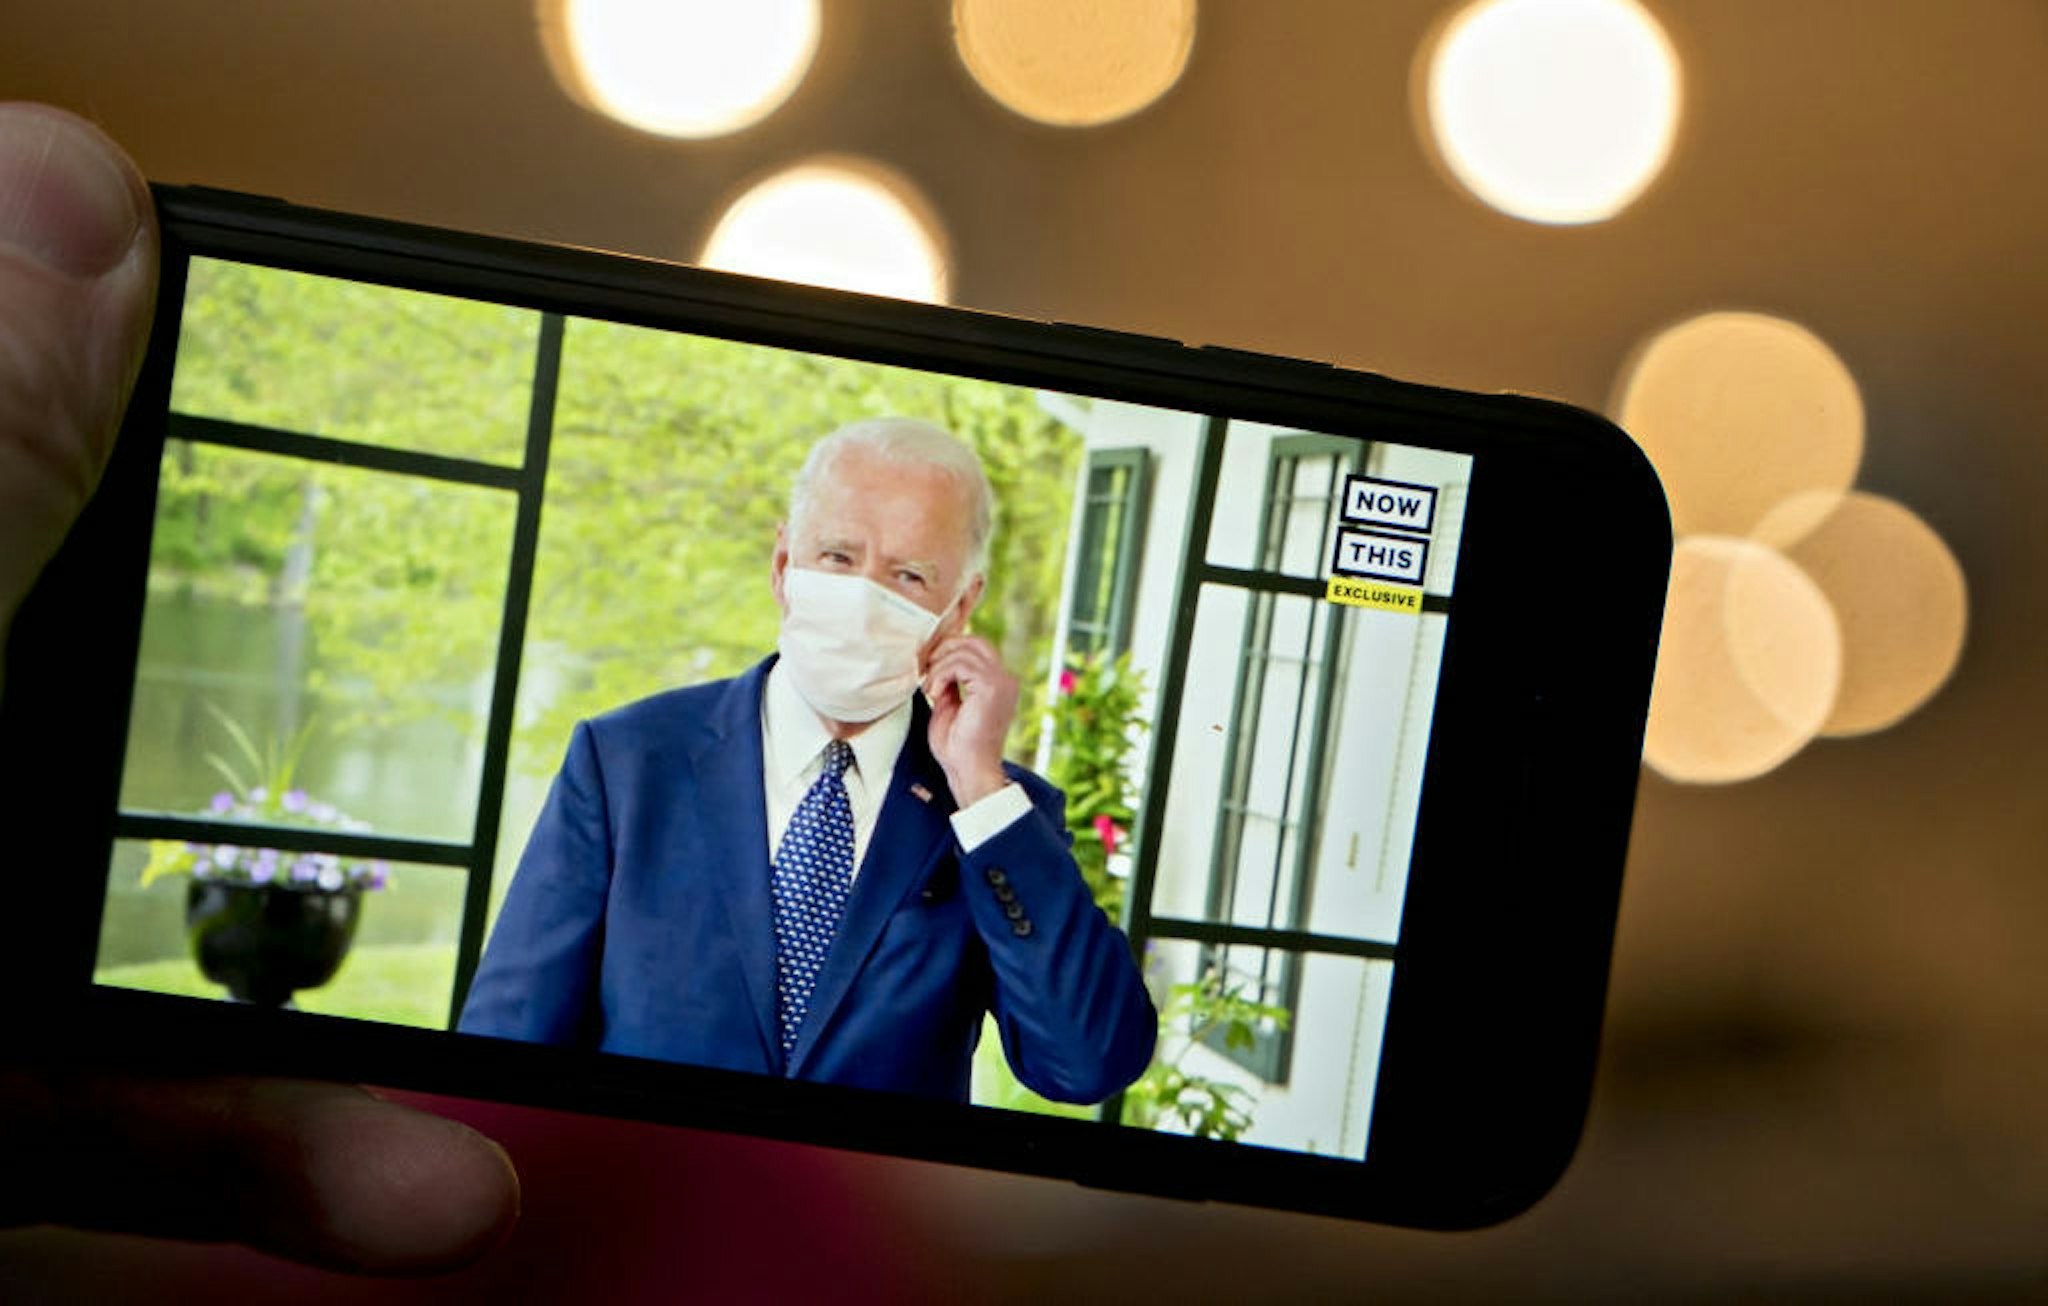 Former Vice President Joe Biden, presumptive Democratic presidential nominee, wears a protective mask during a NowThis economic address seen on a smartphone in Arlington, Virginia, U.S., on Friday, May 8, 2020. A super political action committee backing Joe Biden will launch a $10 million television ad campaign touting the presumptive Democratic nominee's leadership on the economic recovery after the 2008 financial crisis. Photographer: Andrew Harrer/Bloomberg